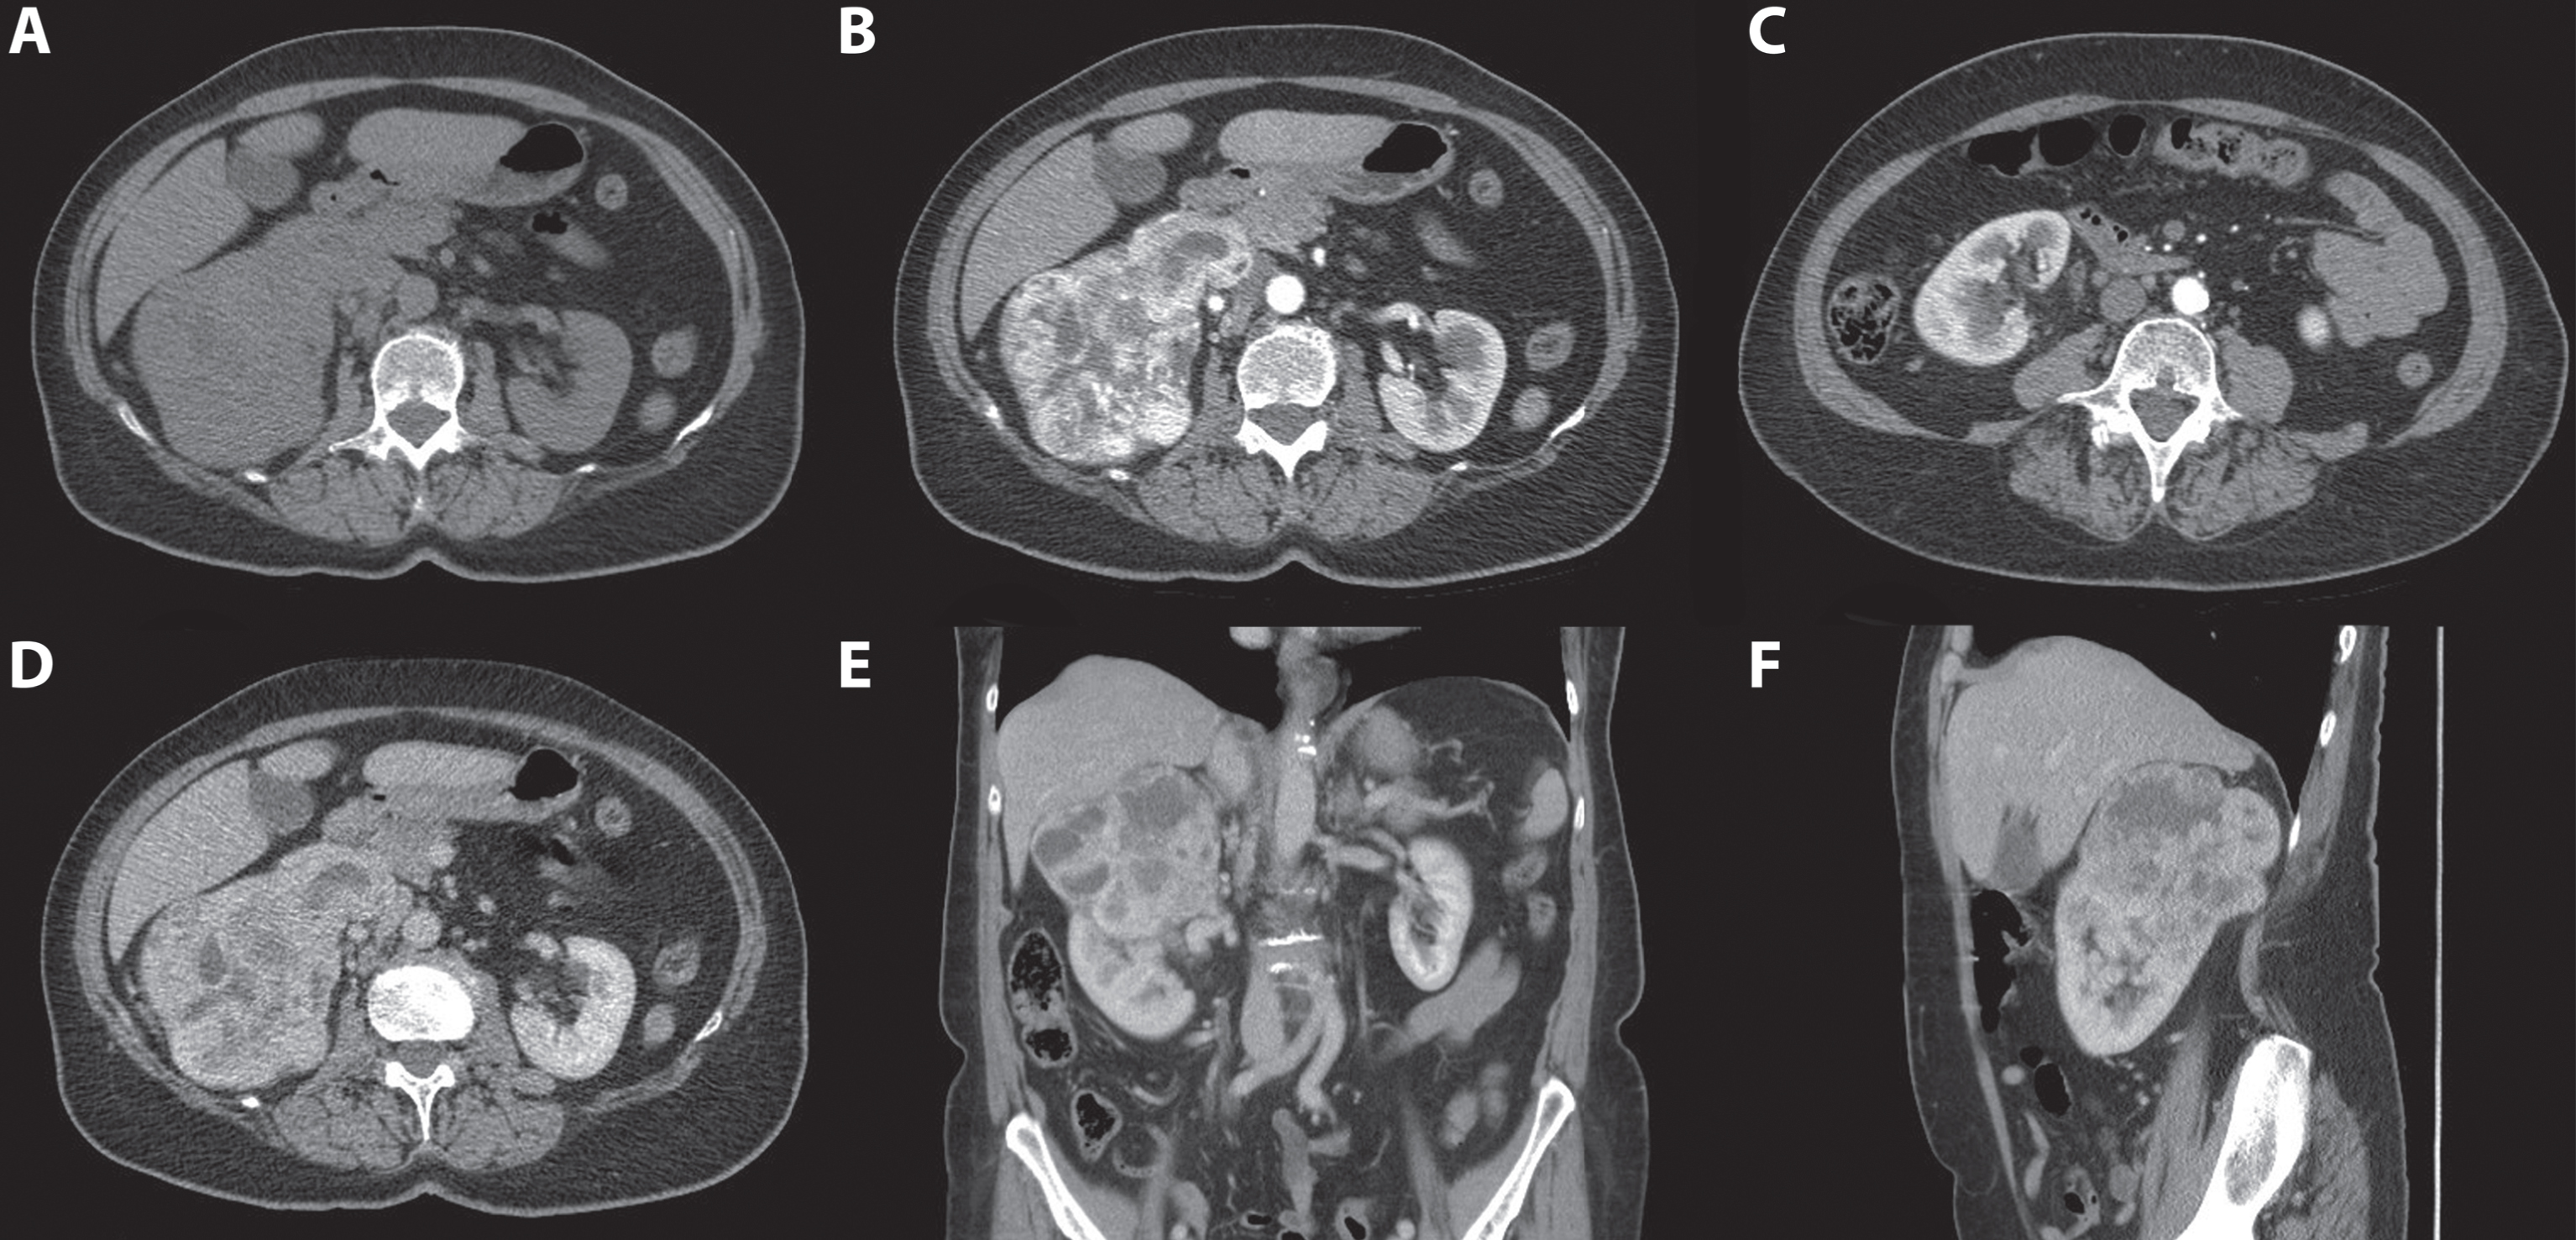 A 70-year-old women was evaluated for flank pain and hematuria. A screening ultrasound showed a hypervascular and hyperechoic renal mass of the right kidney. A 3-phase CT scan showed a tumor originating from the upper pole of the right kidney which measured approximately 124 mm×77 mm×95 mm. During the non-contrast phase the tumor showed a heterogeneous aspect with mixed attenuation consistent with parts of central tumor necrosis. (A) Strong enhancement of the solid parts is seen in the corticomedullary phase. (B) The lower pole of the right kidney was unaffected. (C) In the nephrogenic phase, a clear washout effect is seen. (D) Coronal (E) and saggital (F) reconstructions in the nephrogenic phase confirm the tumor to be located mainly in the upper pole with growth toward the liver and centrally towards the renal hilum. Histopathology after open radical nephrectomy confirmed the diagnosis of a 120 mm large, Furhman grade 3, clear cell renal cell carcinoma.